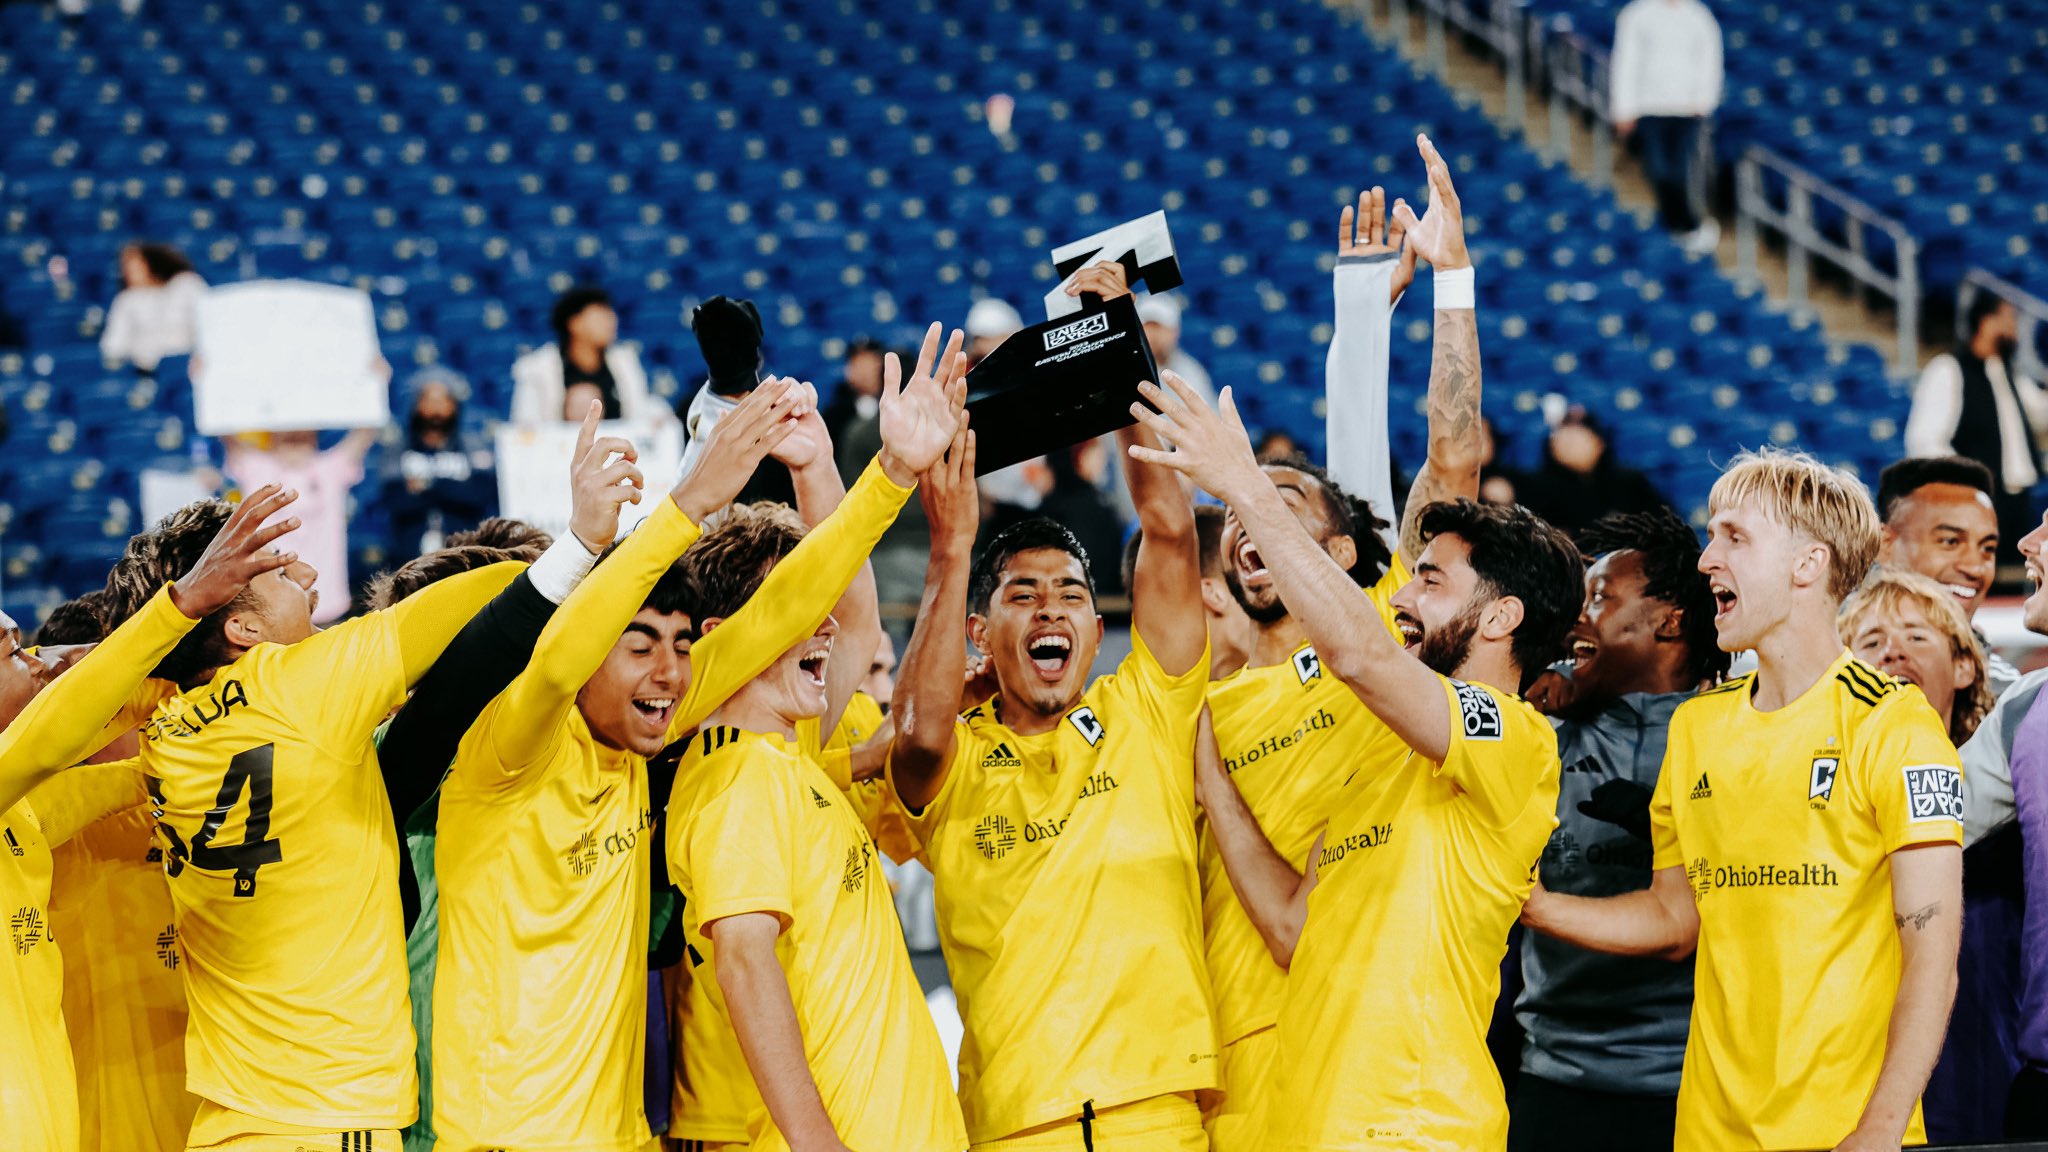 Columbus Crew 2 on the verge of back-to-back MLS NEXT Pro championships